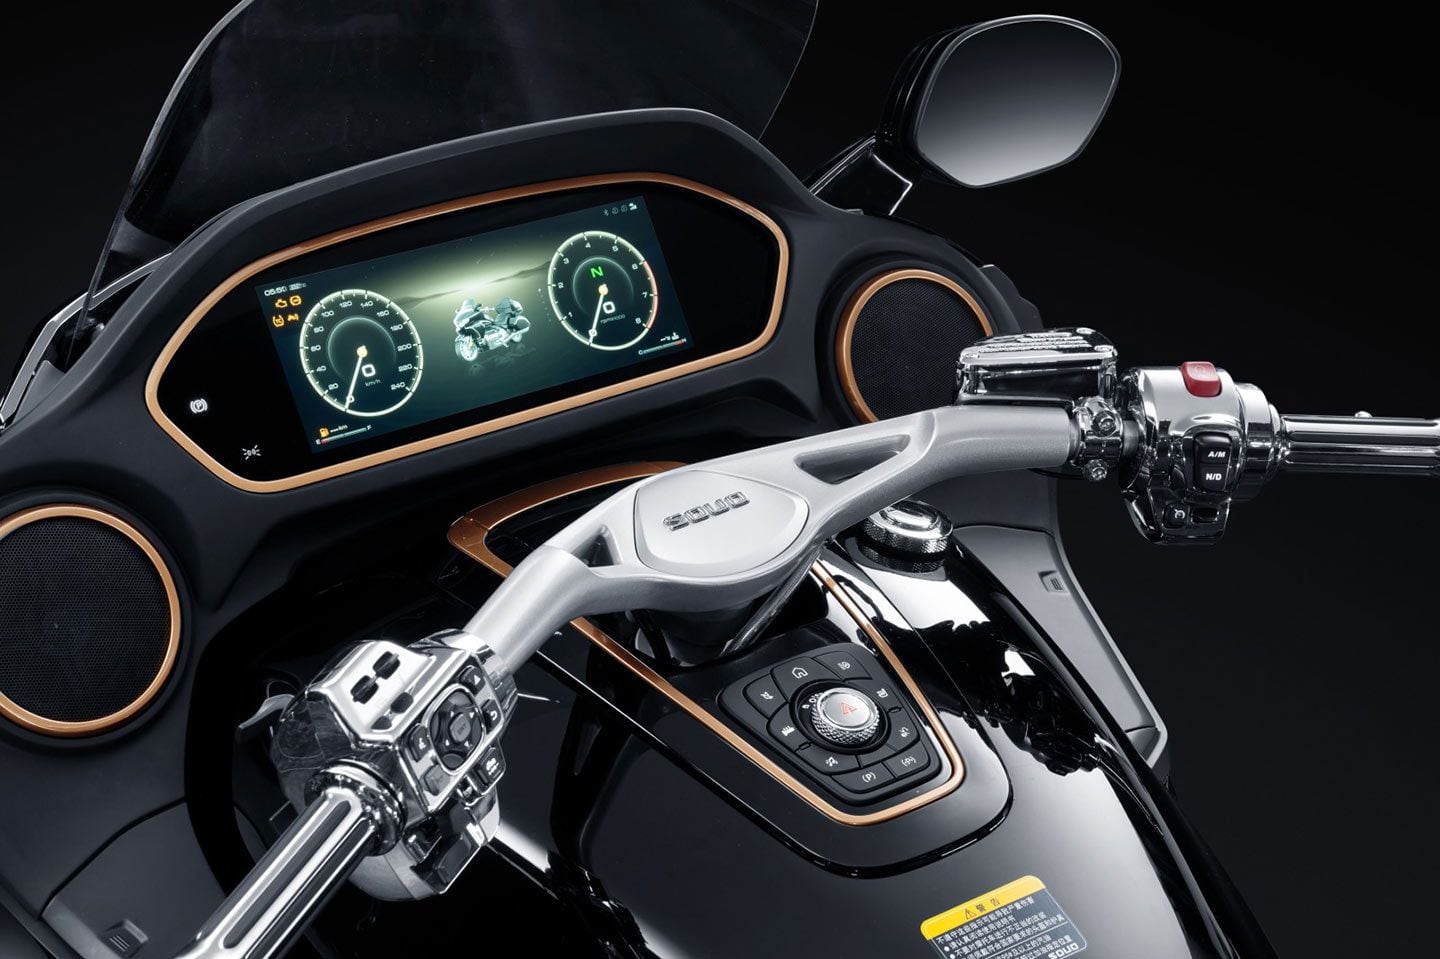 The huge TFT display looks very similar to Harley-Davidson’s new Road Glide and Street Glide screens, while the handlebar control pods are very similar to those on the current Gold Wing.